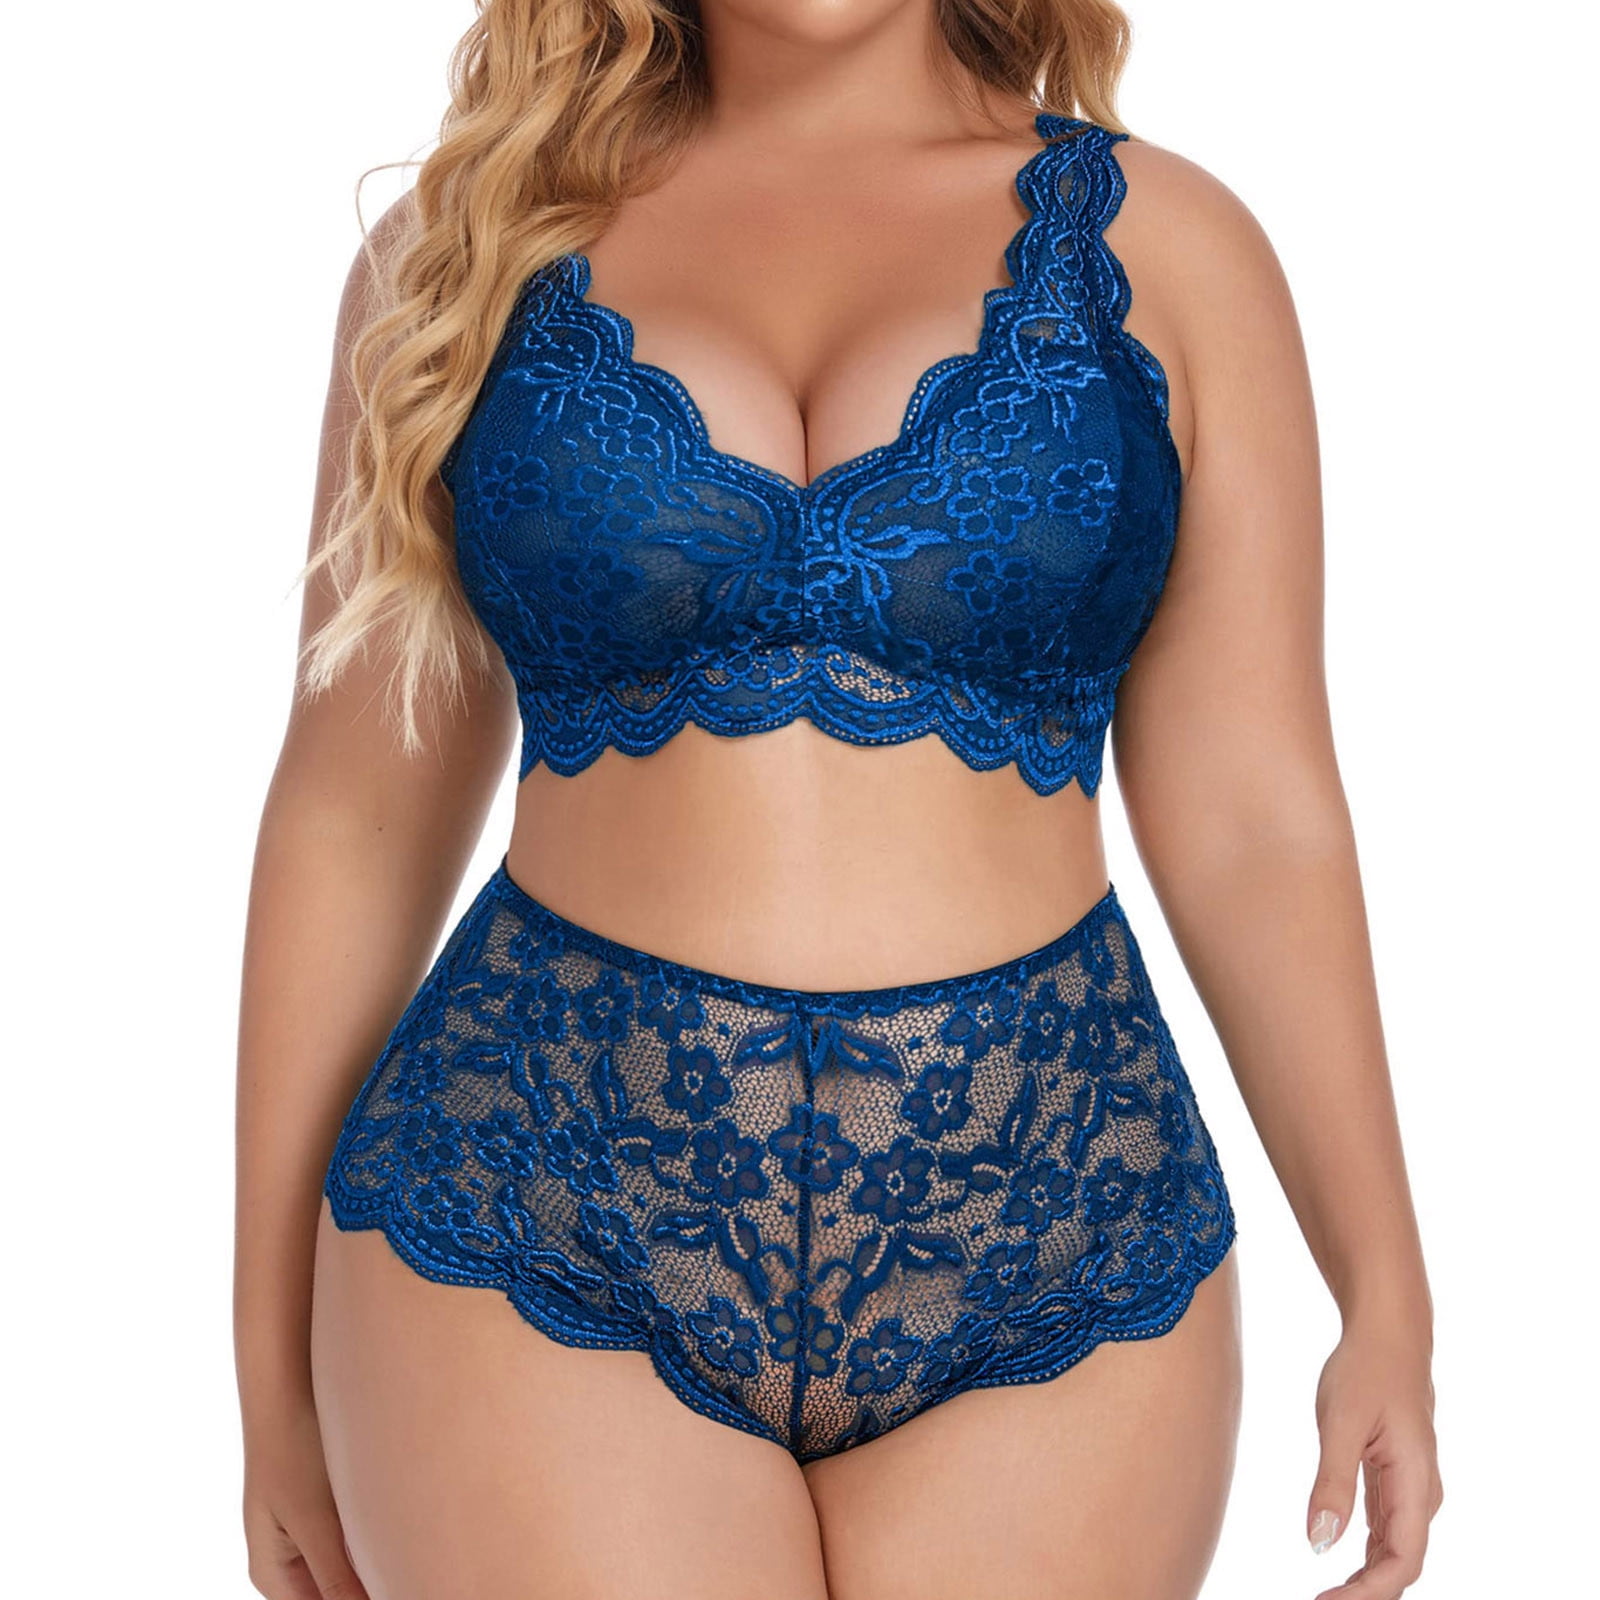 Vedolay Lingerie Sets For Women Plus Size 2 Piece Lingerie for Women  Strappy Bra and Panty Underwear Sets Lace Underwear Set for Women(Blue,XXL)